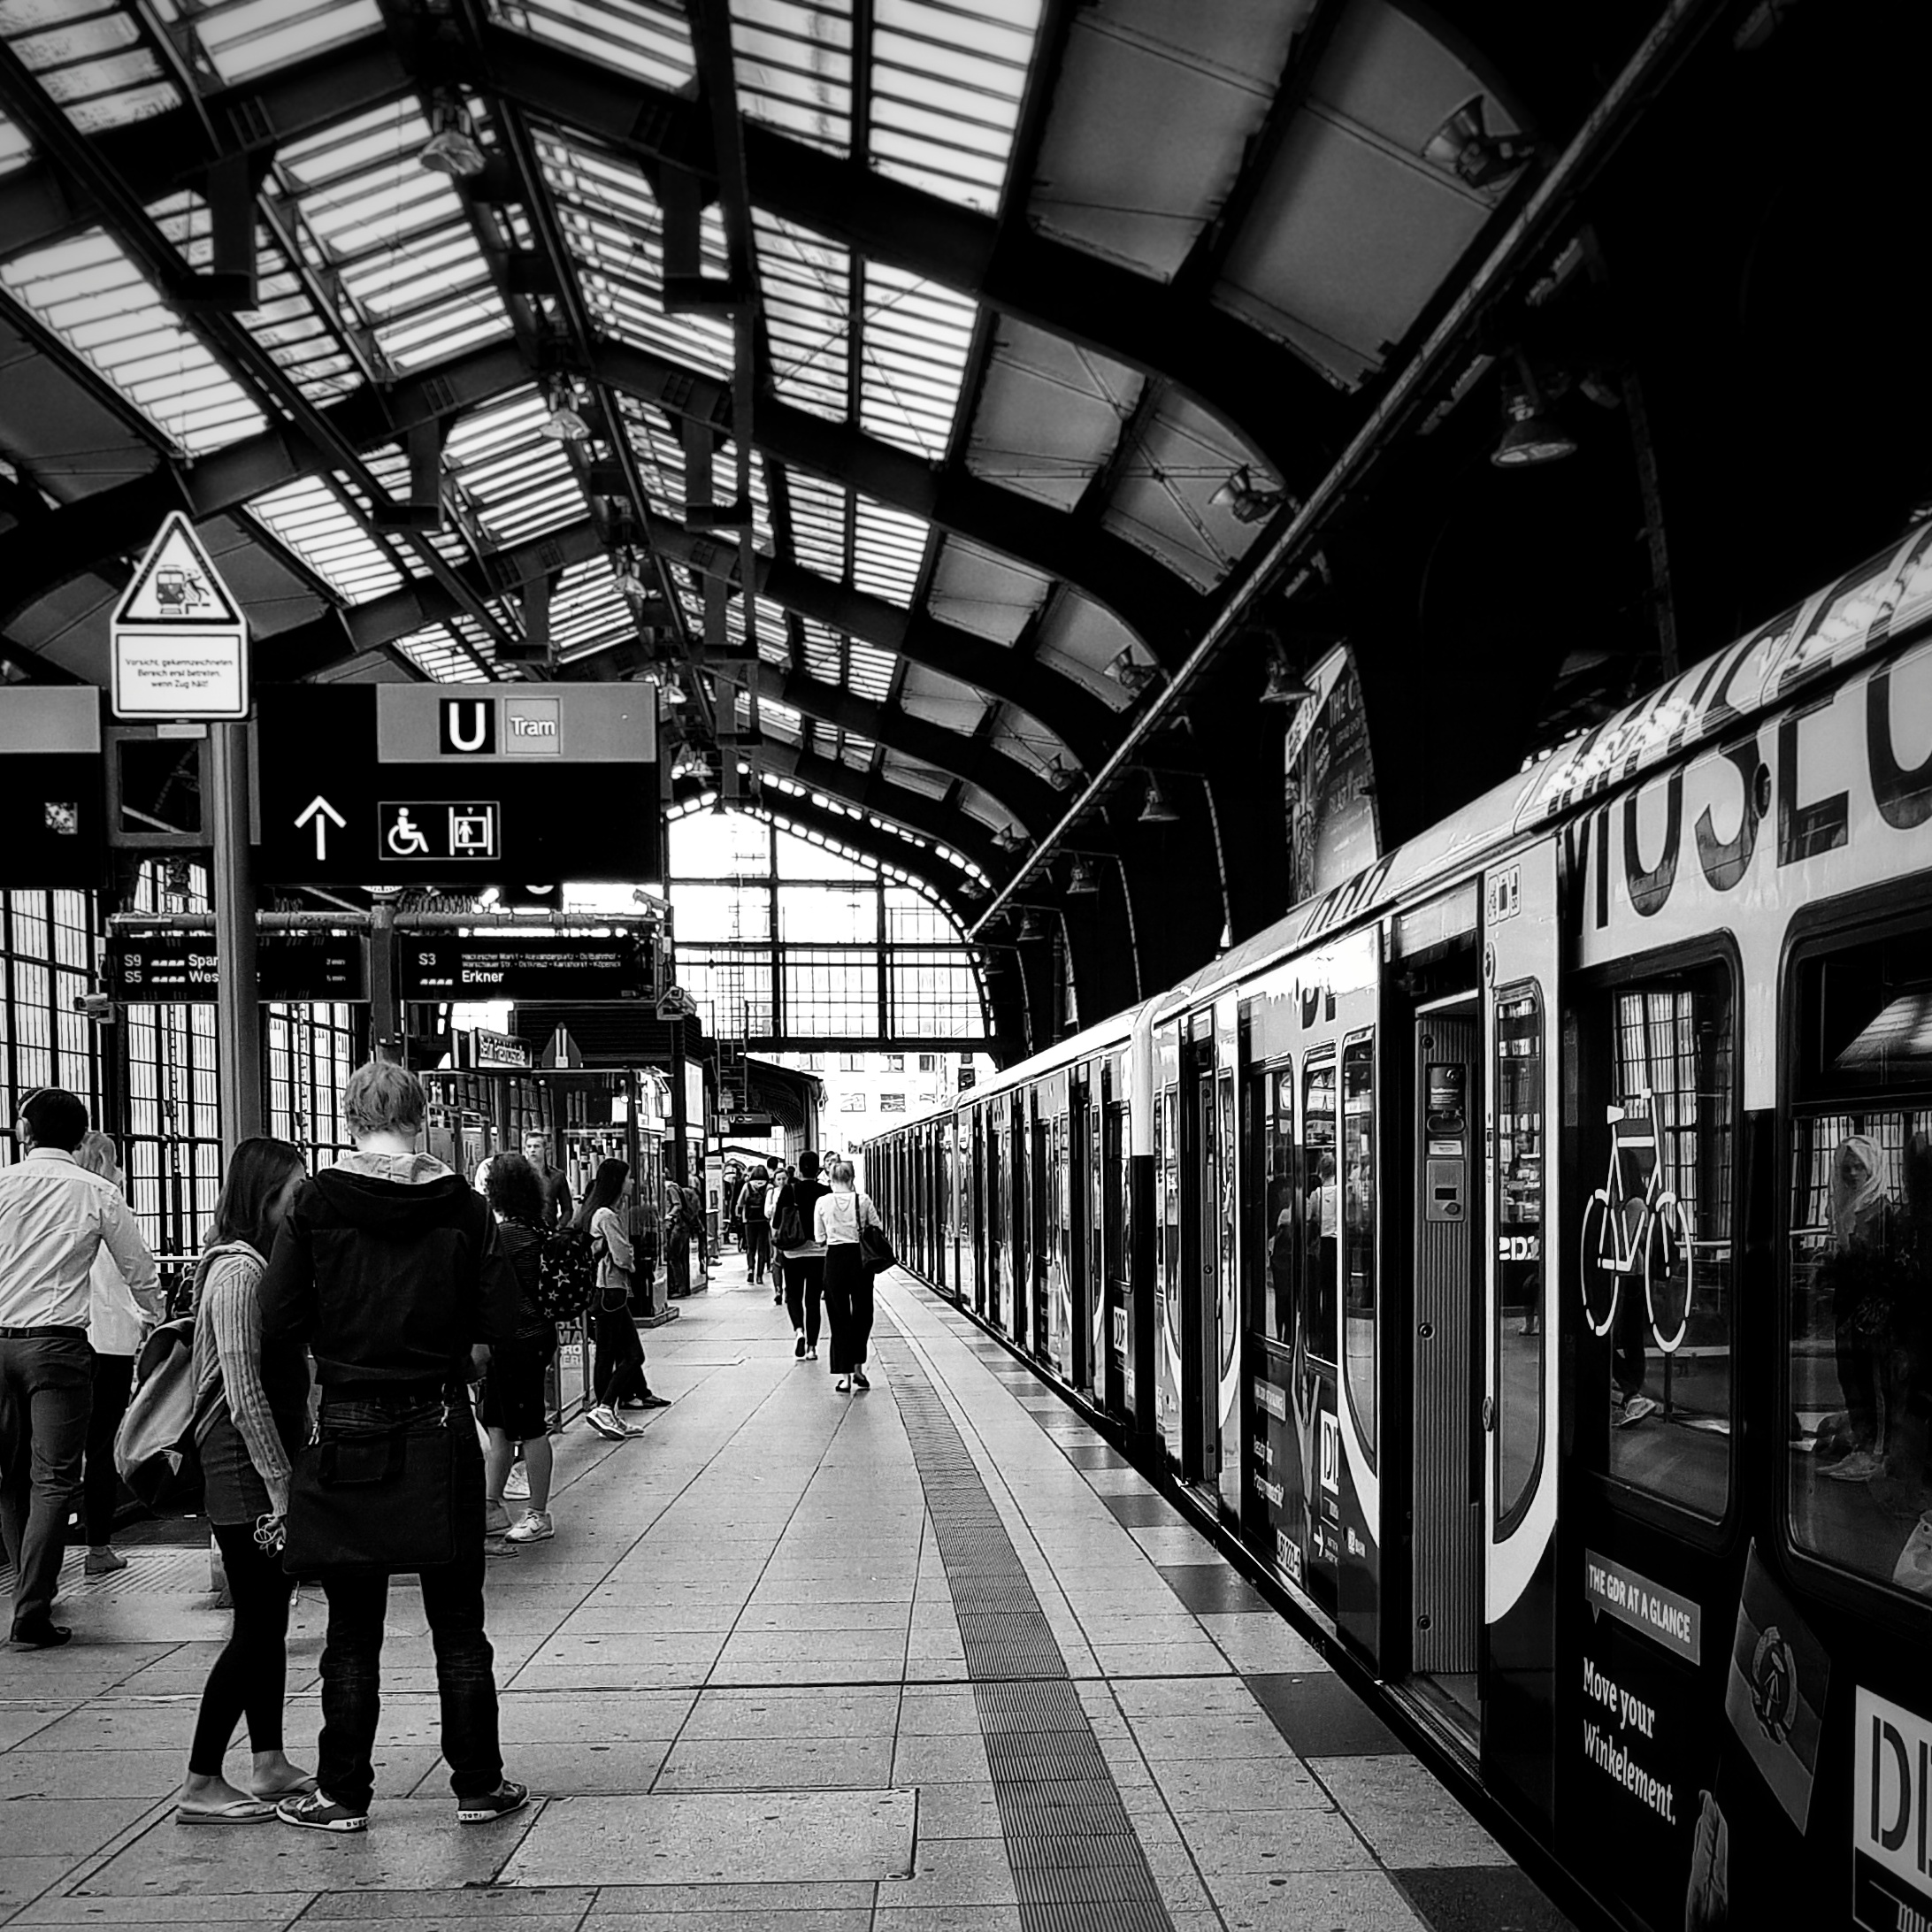 Day 183 - July 02: Commuters on the platform